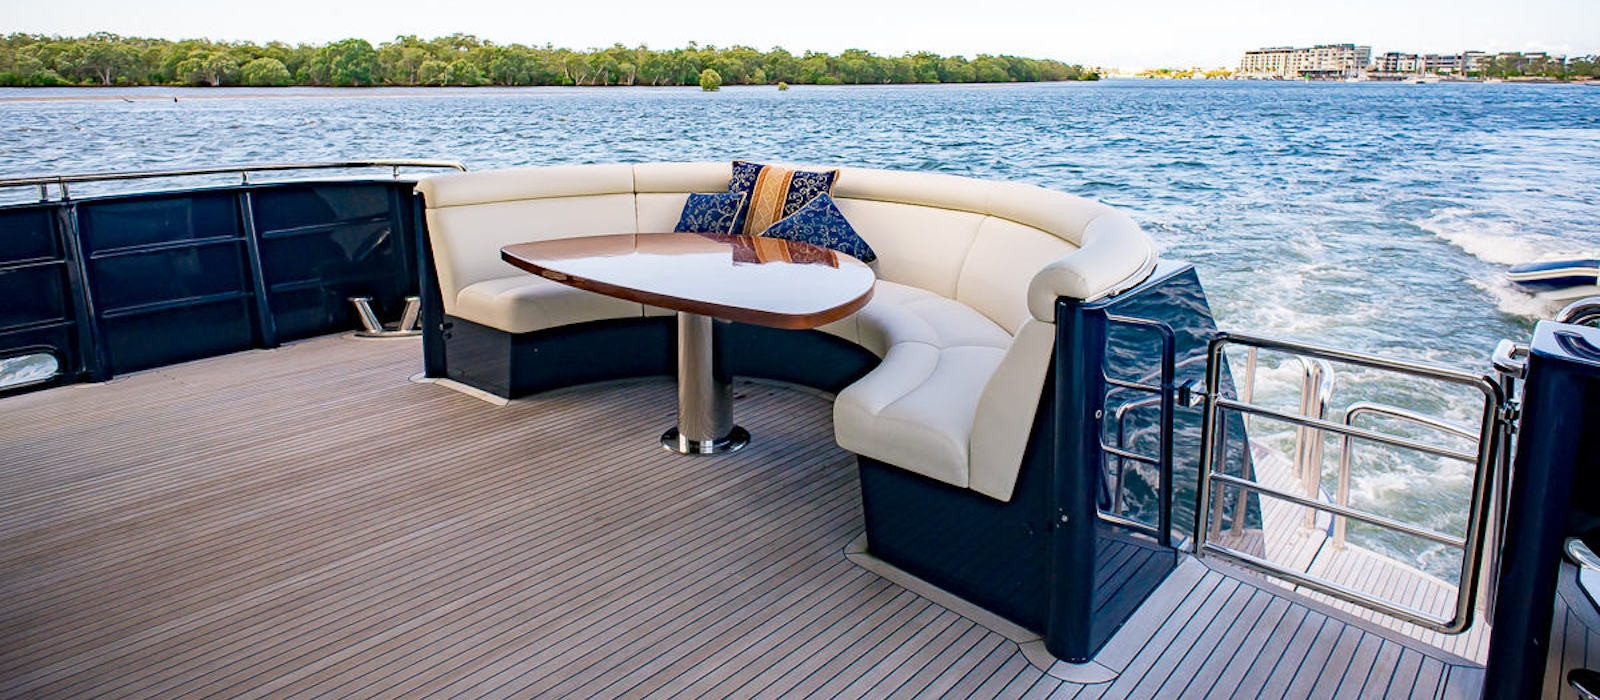 Aft deck lounge on Patriot 1 luxury boat hire